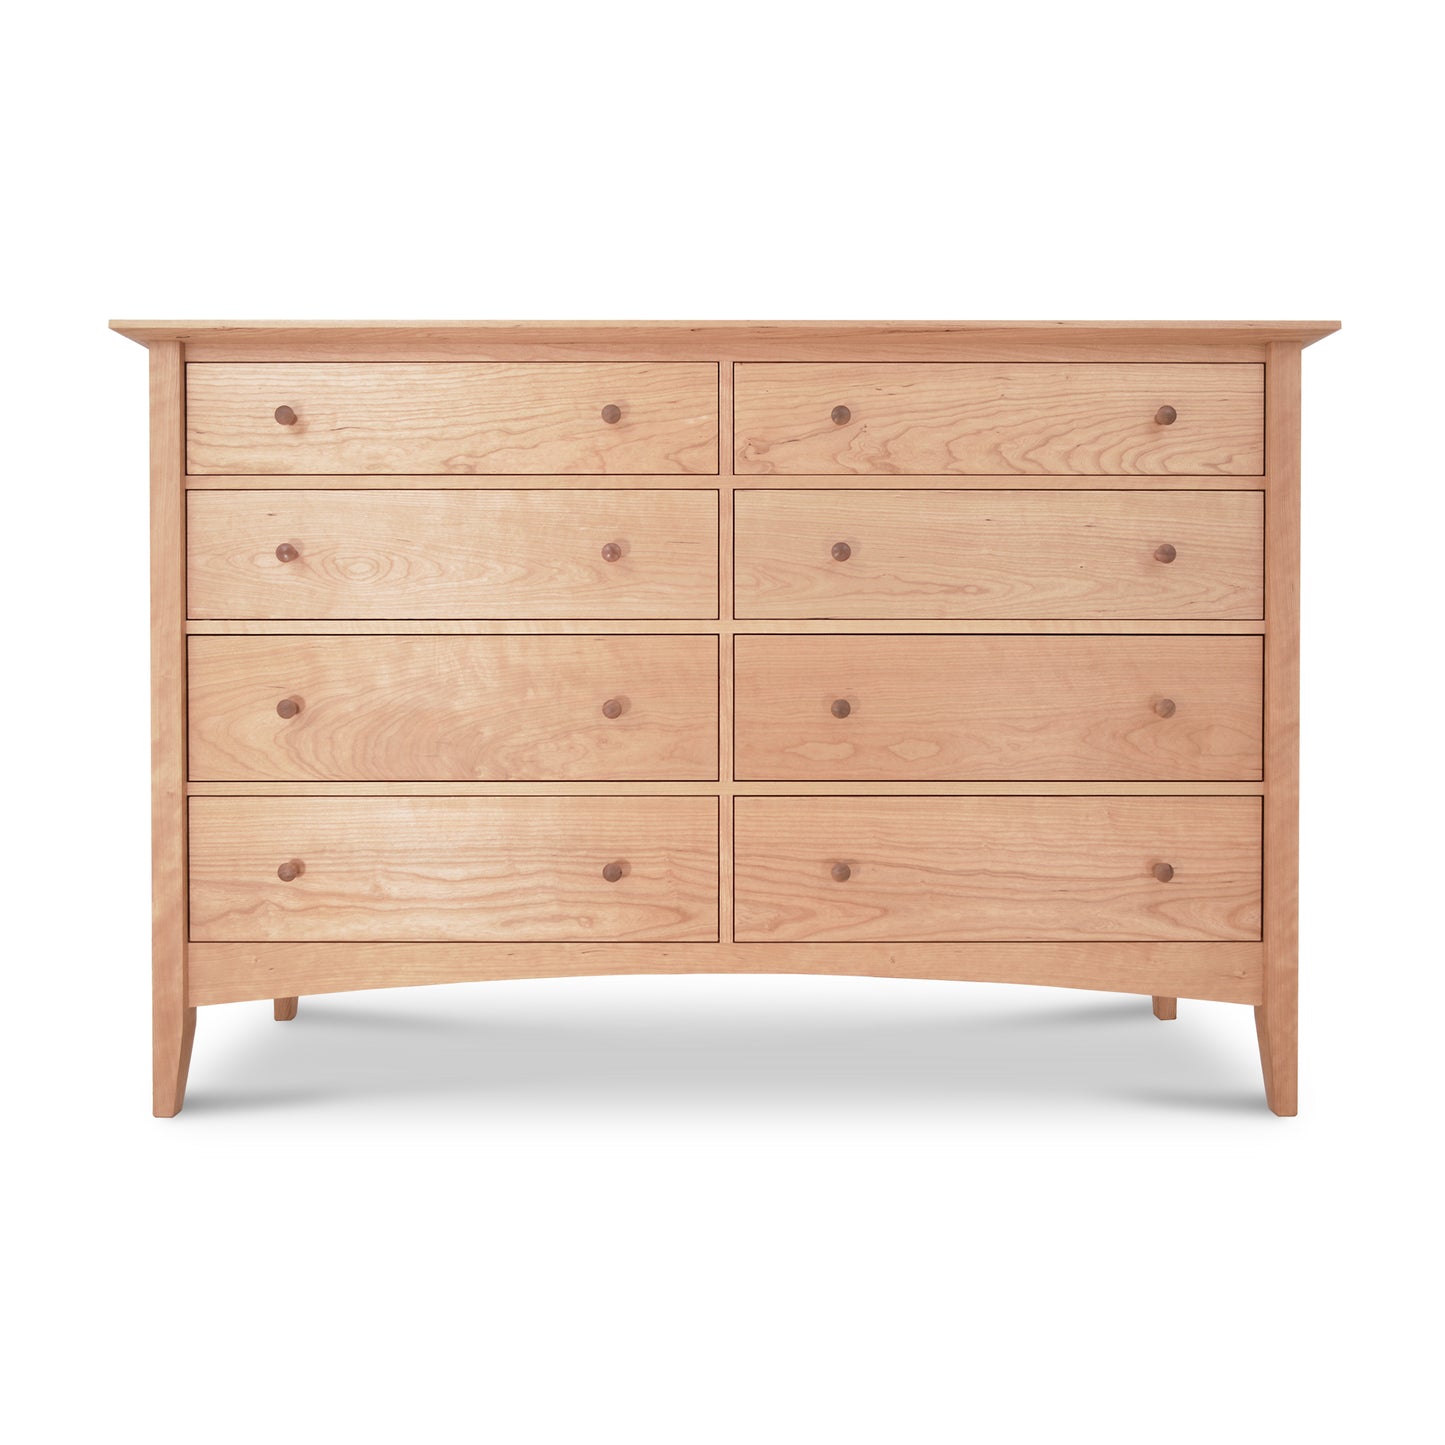 A Maple Corner Woodworks American Shaker 8-Drawer Dresser featuring seven drawers, with four large drawers on the bottom and three smaller drawers on top. The dresser stands on four slanted legs and has a smooth finish.